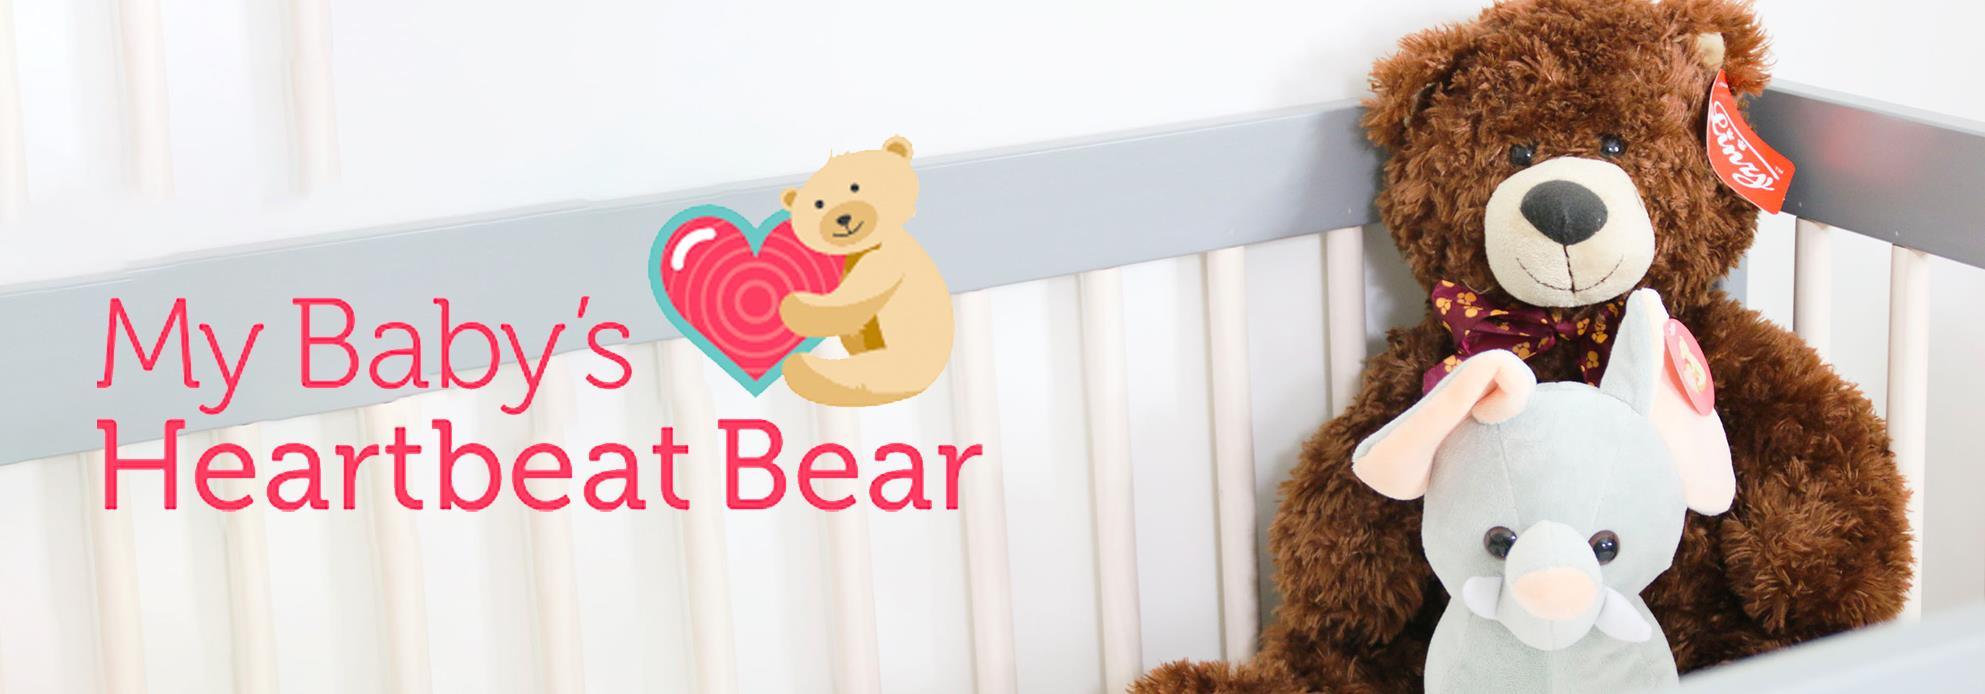 Belly Wrapping For Pregnancy- My Baby's Heartbeat Bear